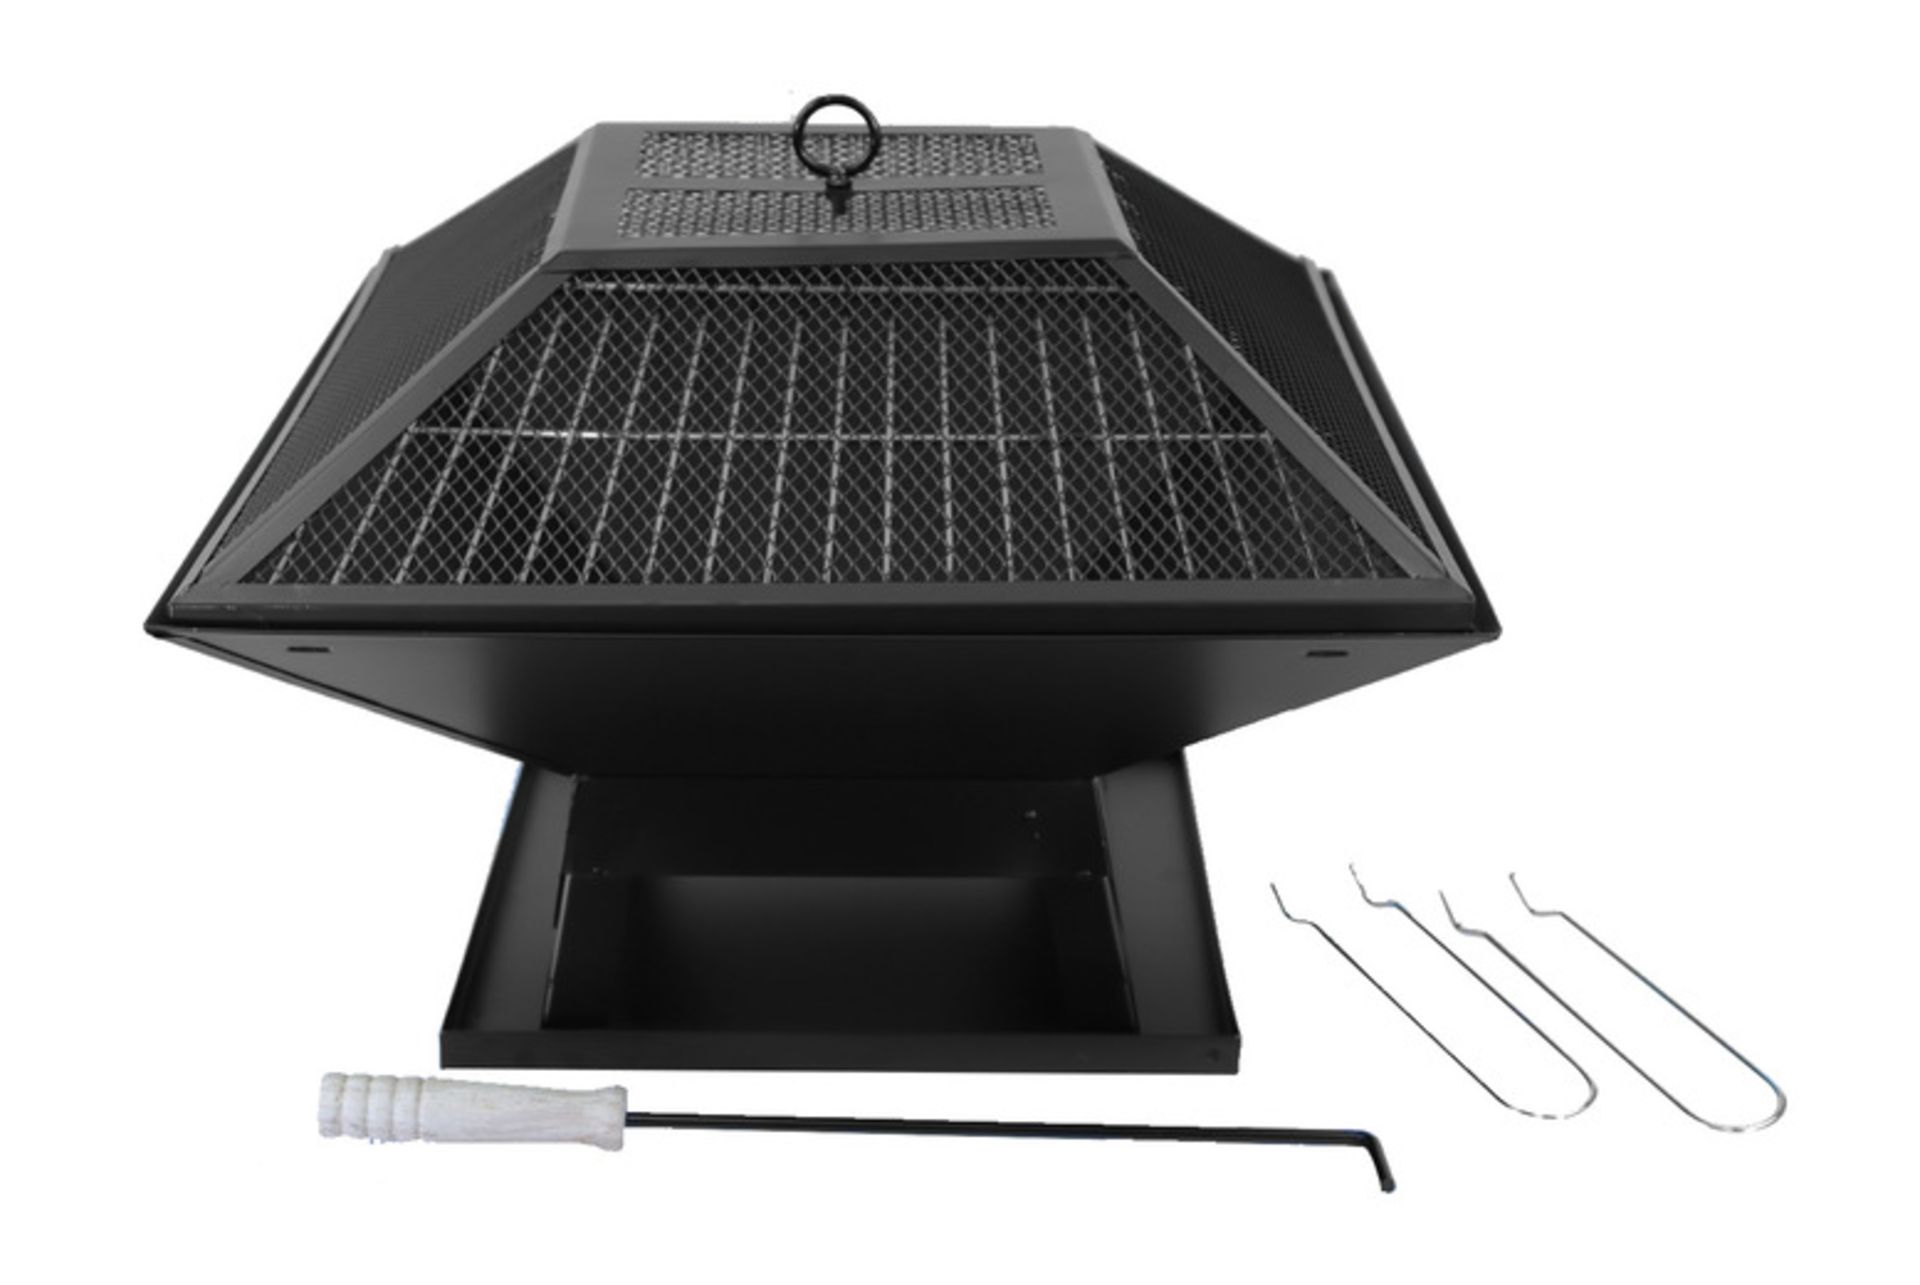 FREE DELIVERY - BBQ GARDEN FIRE PIT AND ACCESSORIES - Image 2 of 2